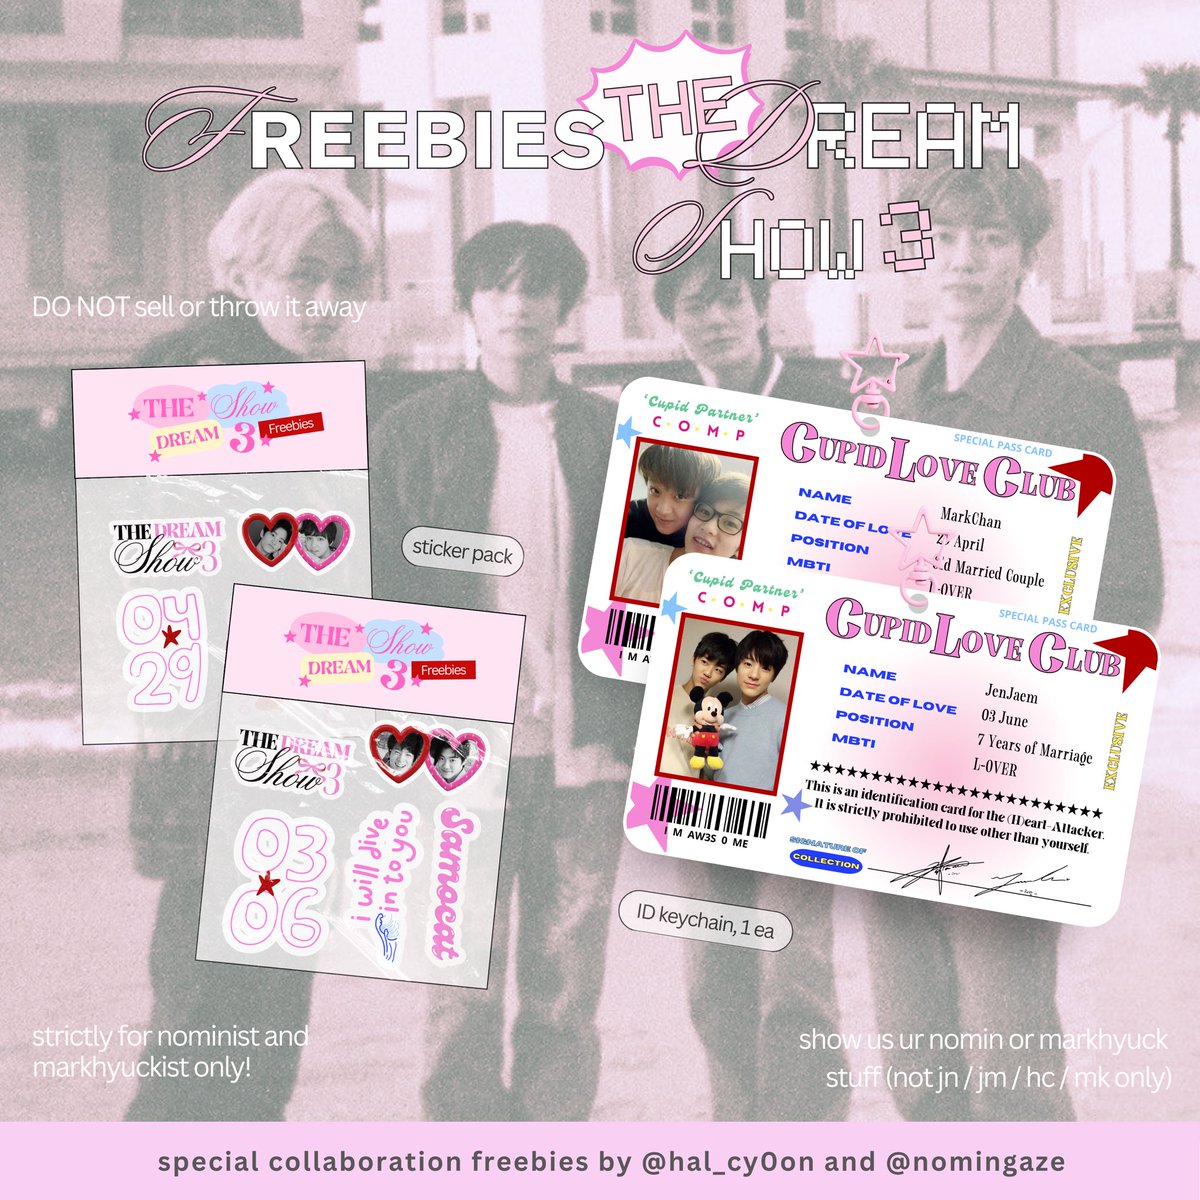 [ rts and likes are appreciated ]

⋆𐙚 ₊˚ THE DREAM SHOW 3 FREEBIES ⟡

— special collaboration freebies by @hal_cy0on and @nomingaze

🧜🏻‍♀️ nomin & markhyuck freebies
— strictly only for nominist n mhist

🪸 18 may 2024
🪼 spot n time will be announce soon!
🦩 find me and say hi